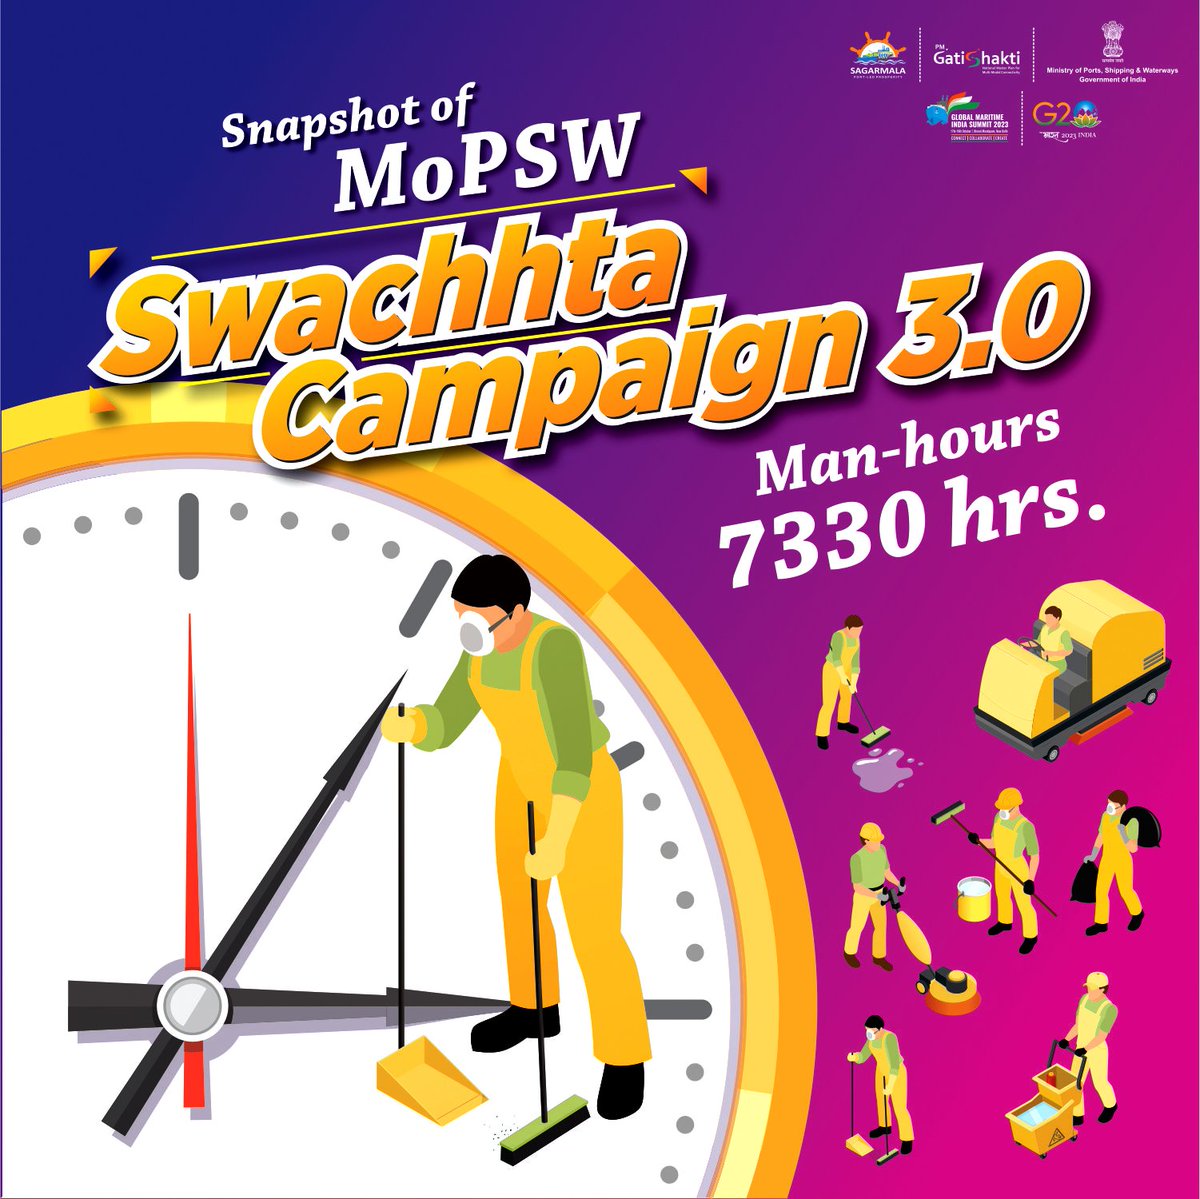 🆙Date #SwachhtaCampaign3.0 #SwachhtaHiSewa on 1st October 2023
✅ Working together is success
👏Kudos to the employees of MoPSW and it's subsidiaries for participating actively in the cleaning campaign and investing their time in 'Swachhanjali'